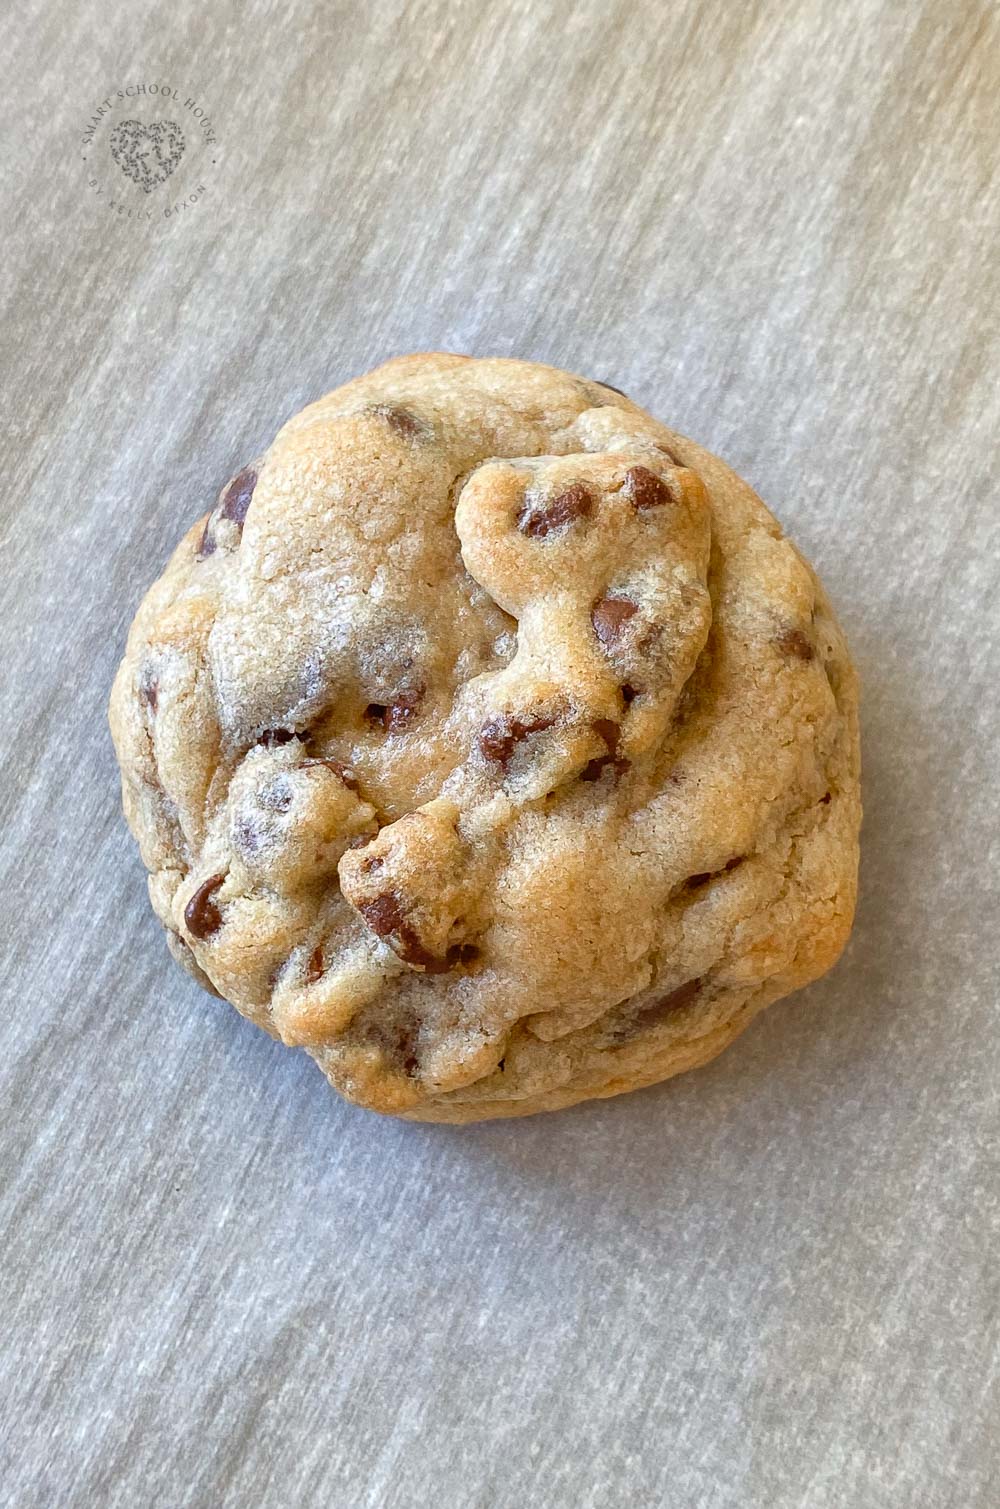 Chocolate Chip Cookies are a classic for a reason. They are the perfectly chewey, chocolatey, ooey gooey, answer to those intense sweet tooth cravings. #chocolate #cookies #chocolatechipcookies